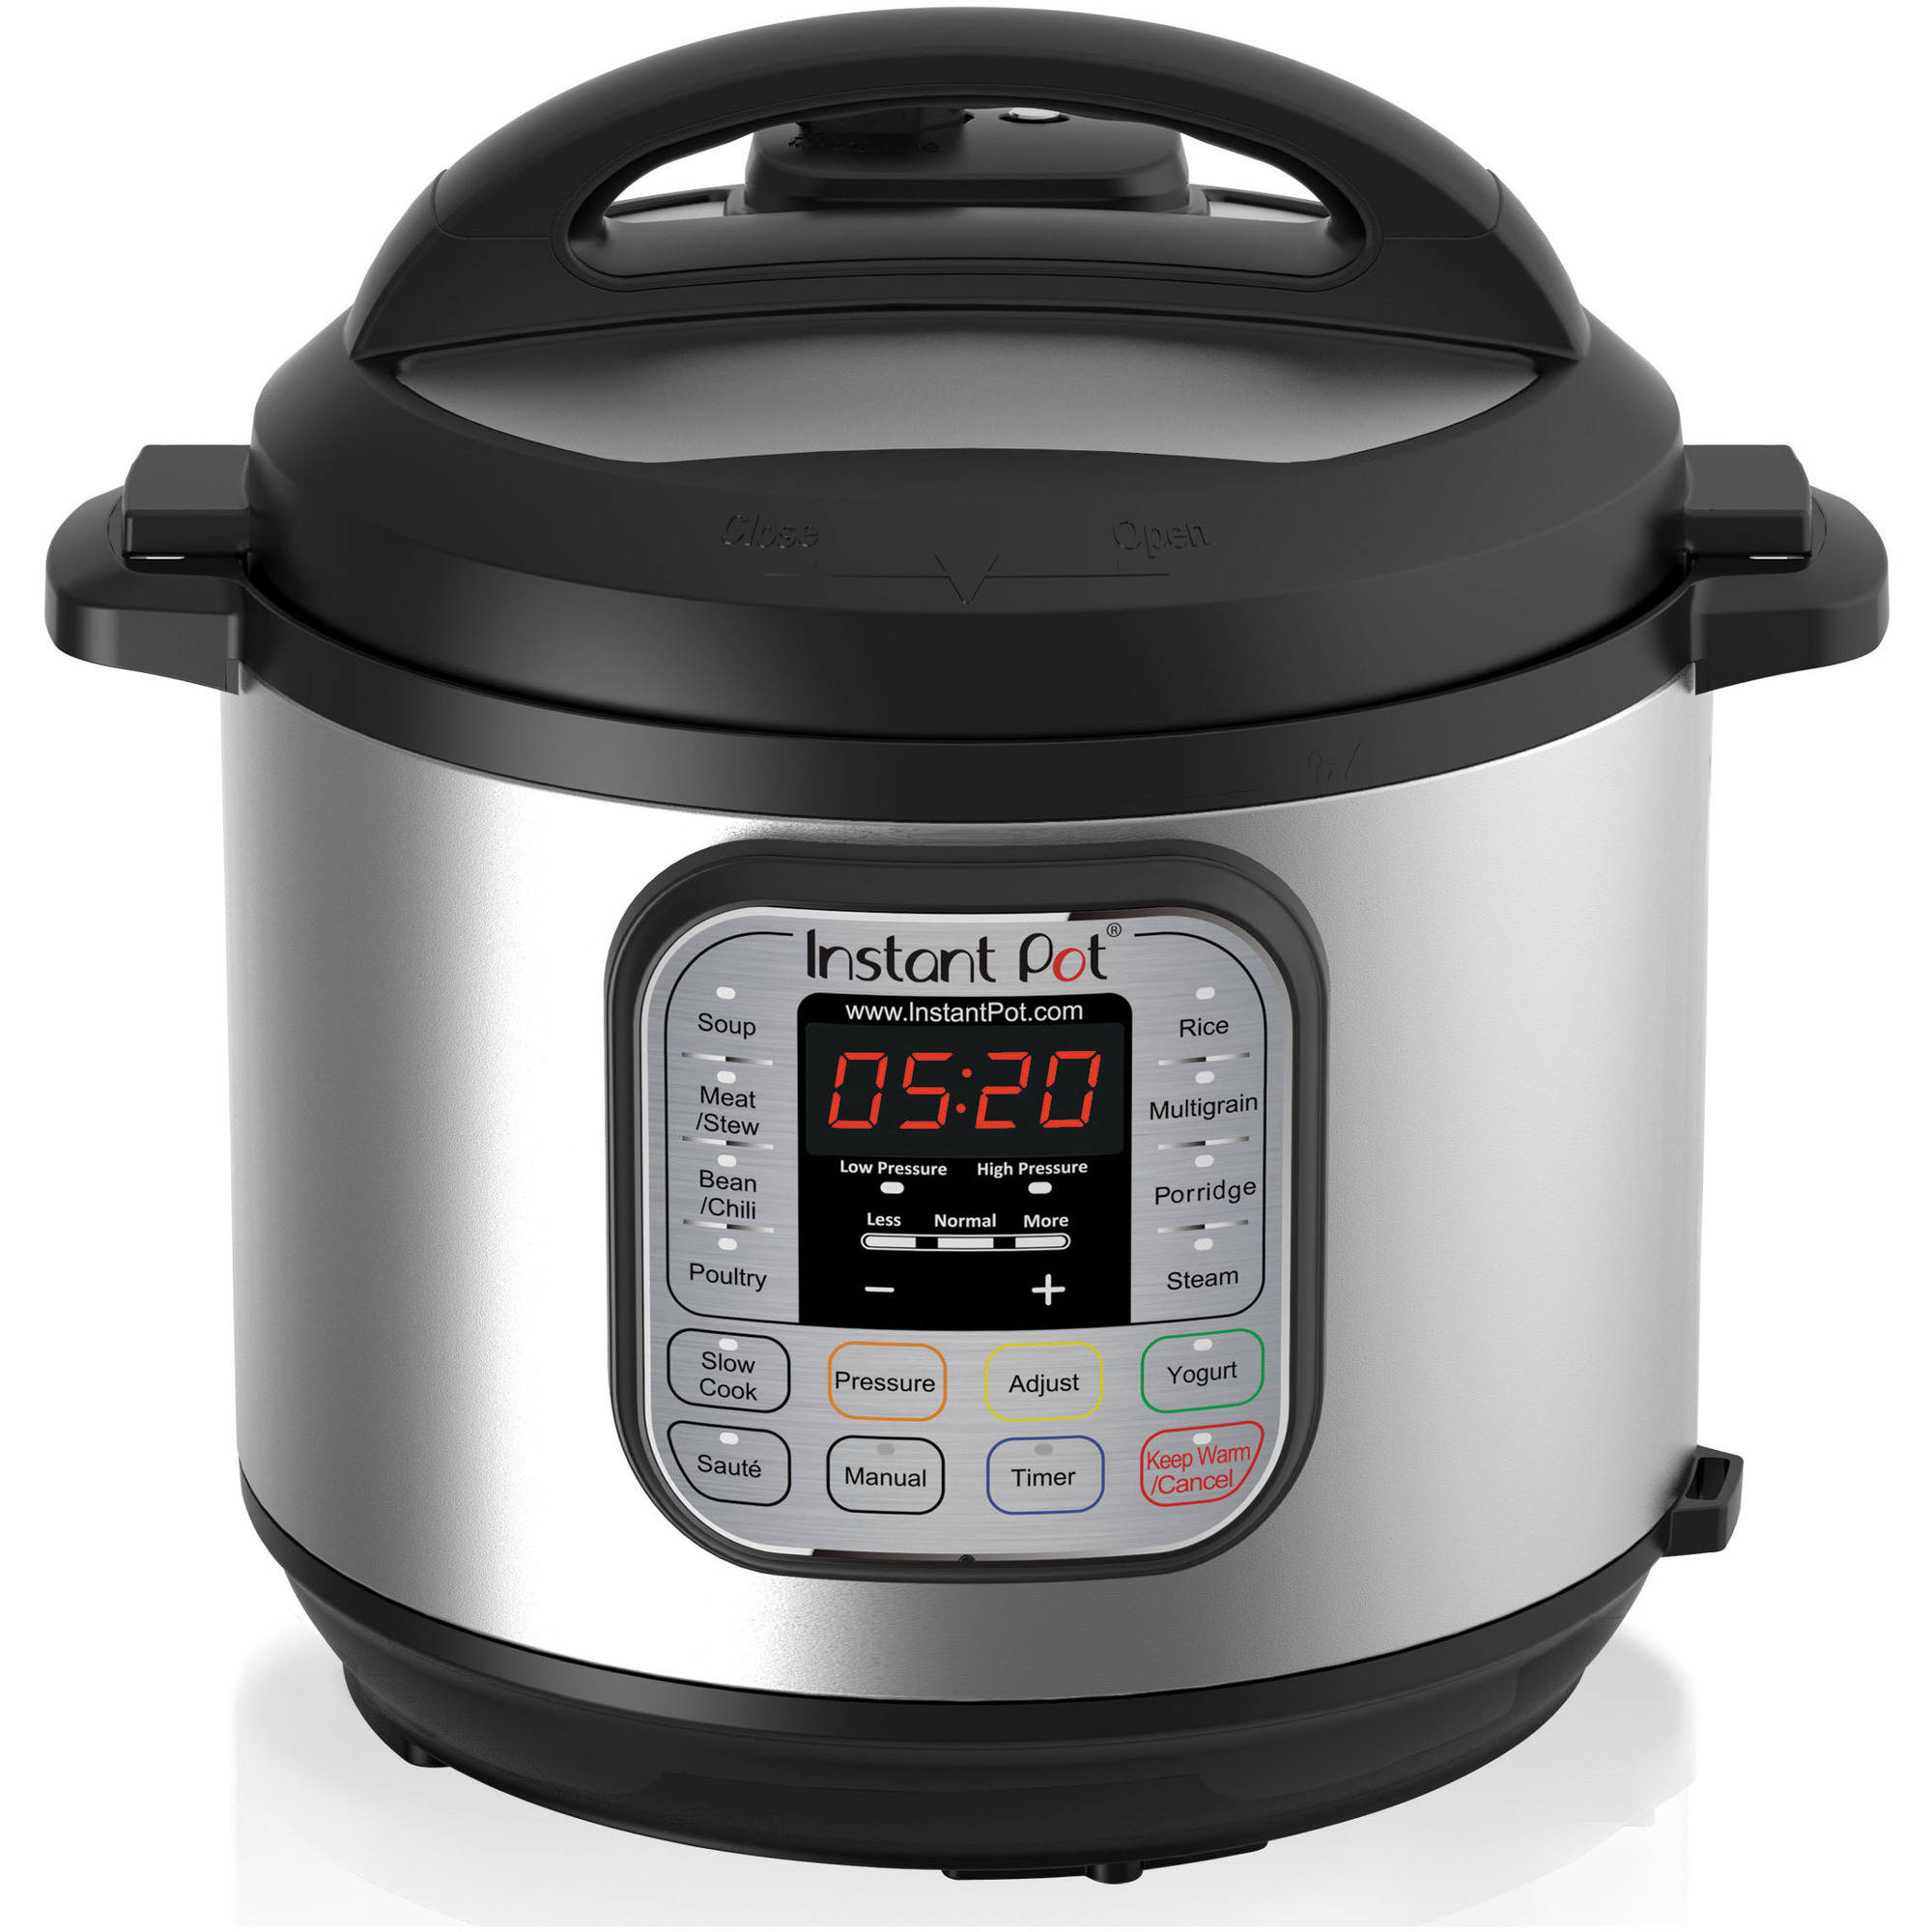 The Instant Pot Duo 7-in-1 Programmable Pressure Cooker set against a white backdrop.